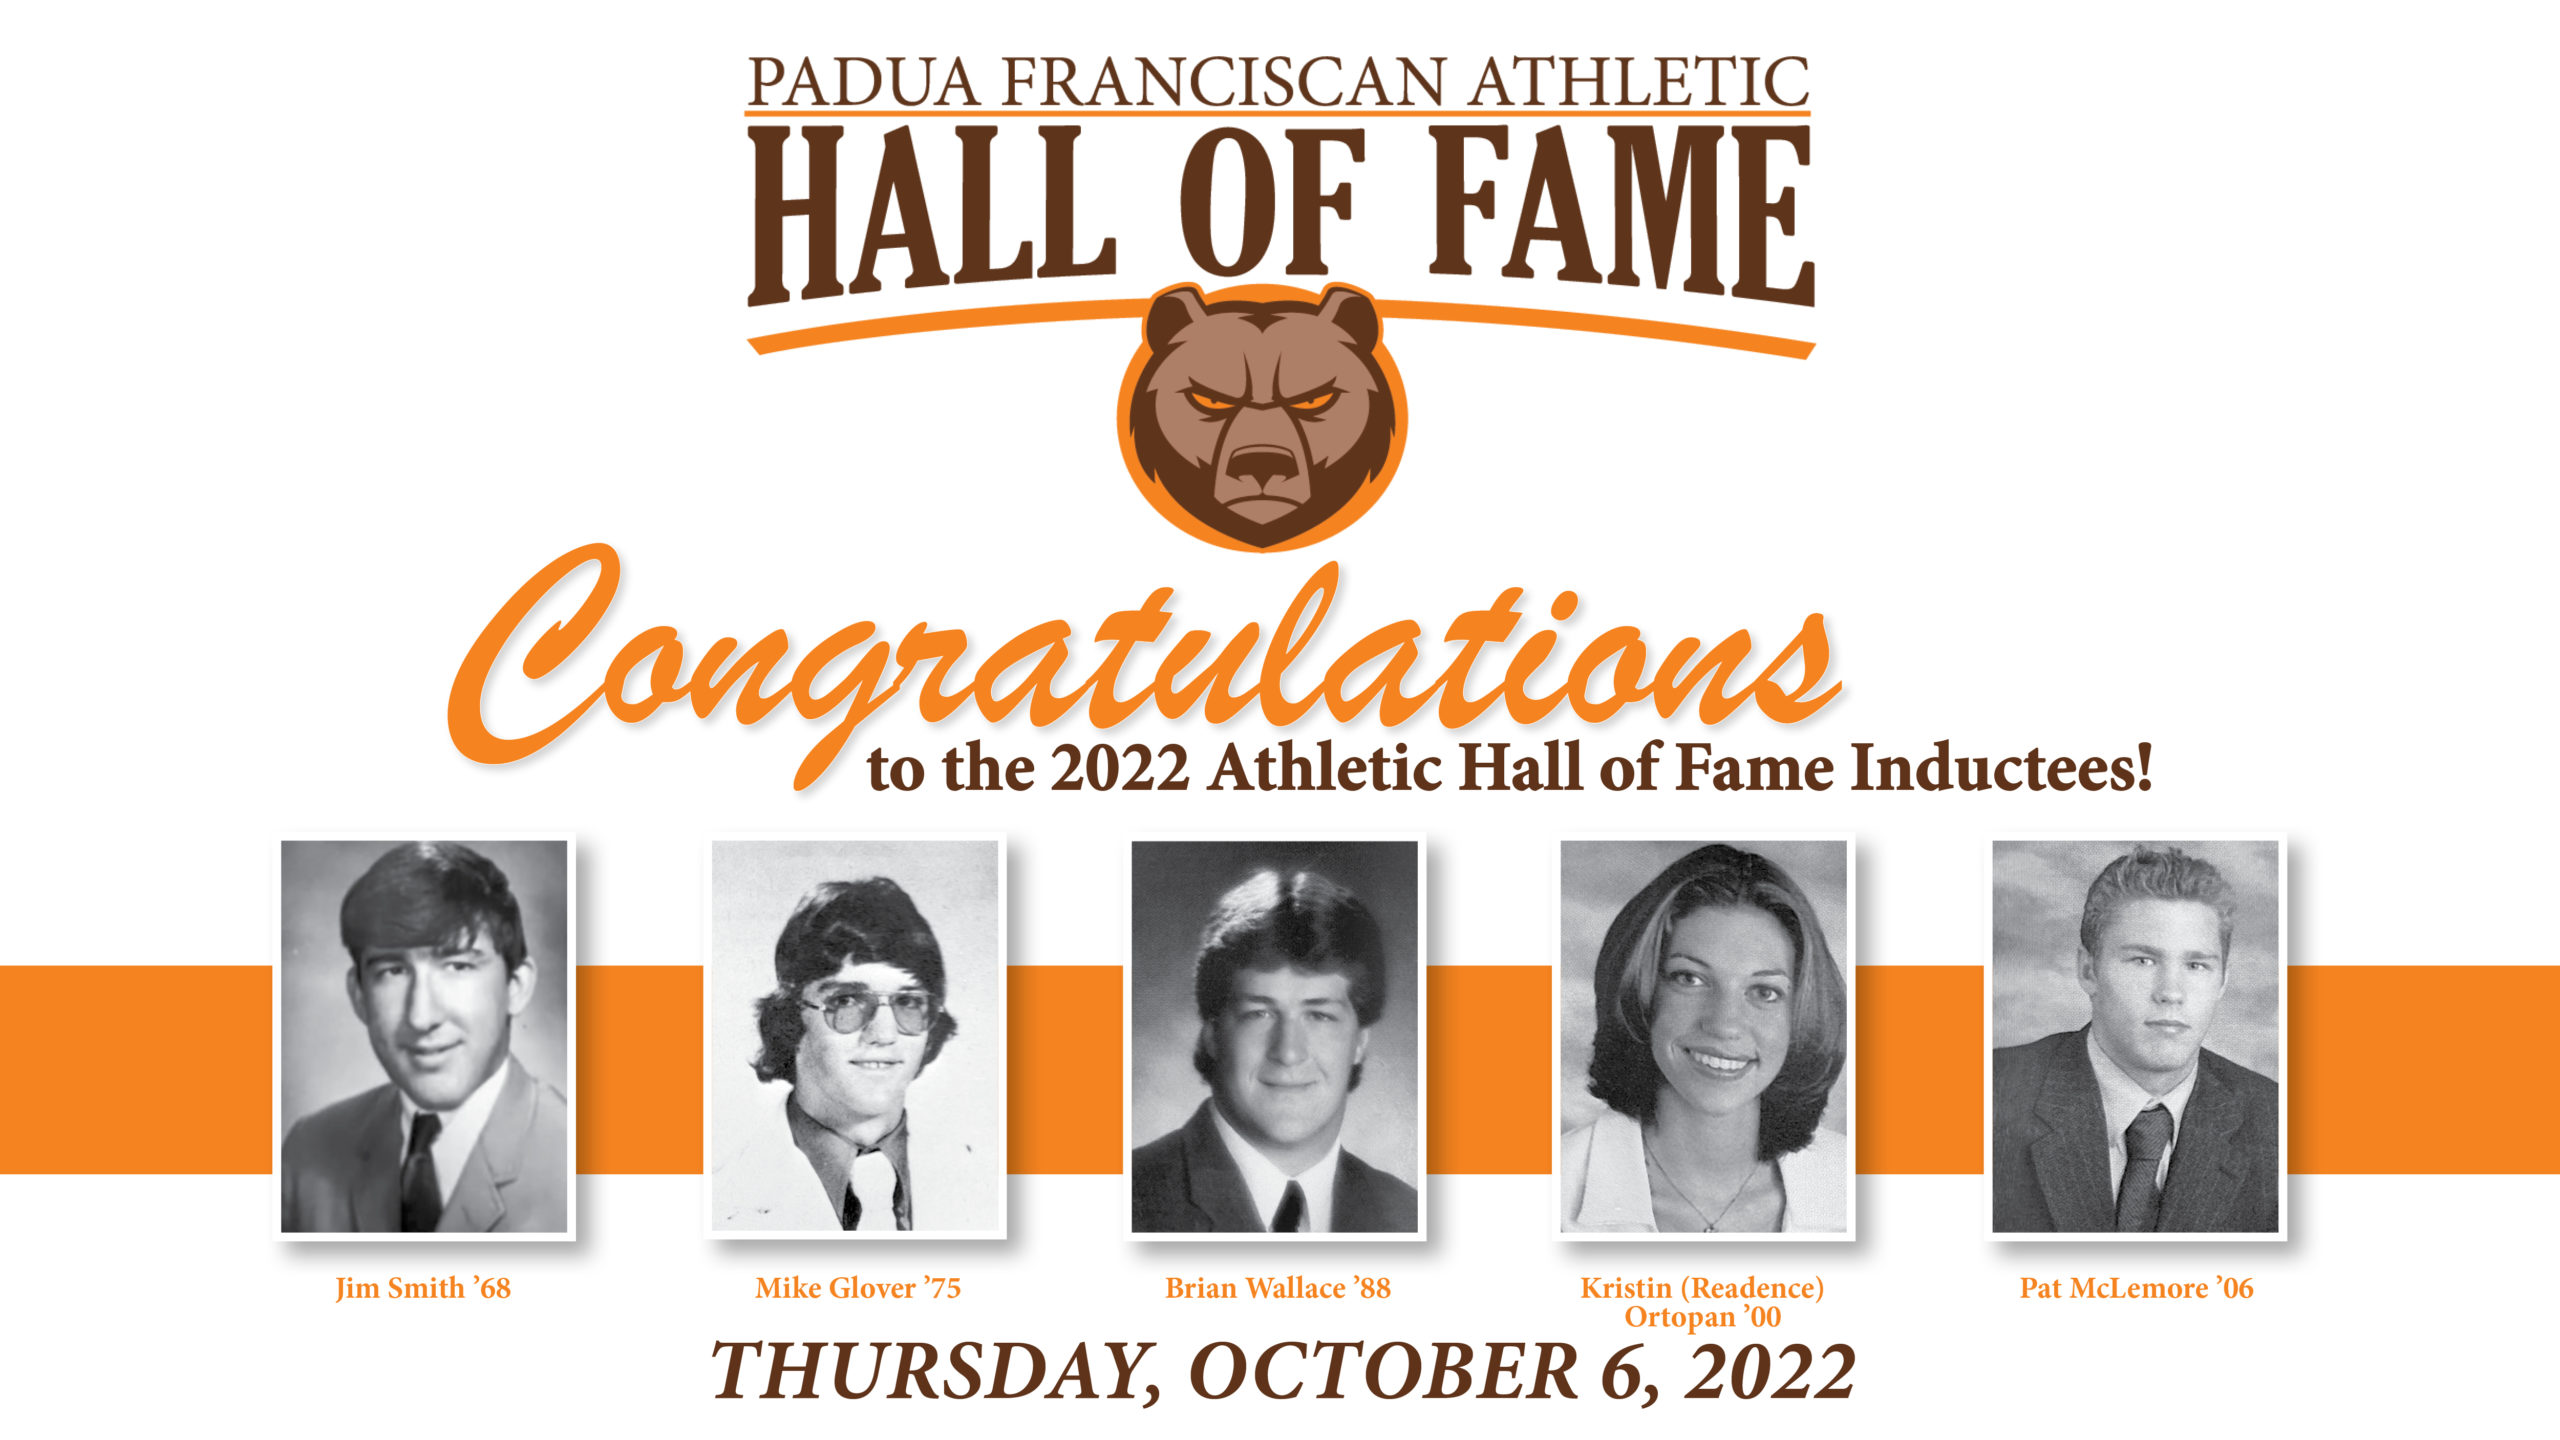 Padua Franciscan Athletic Hall of Fame inductees for 2022